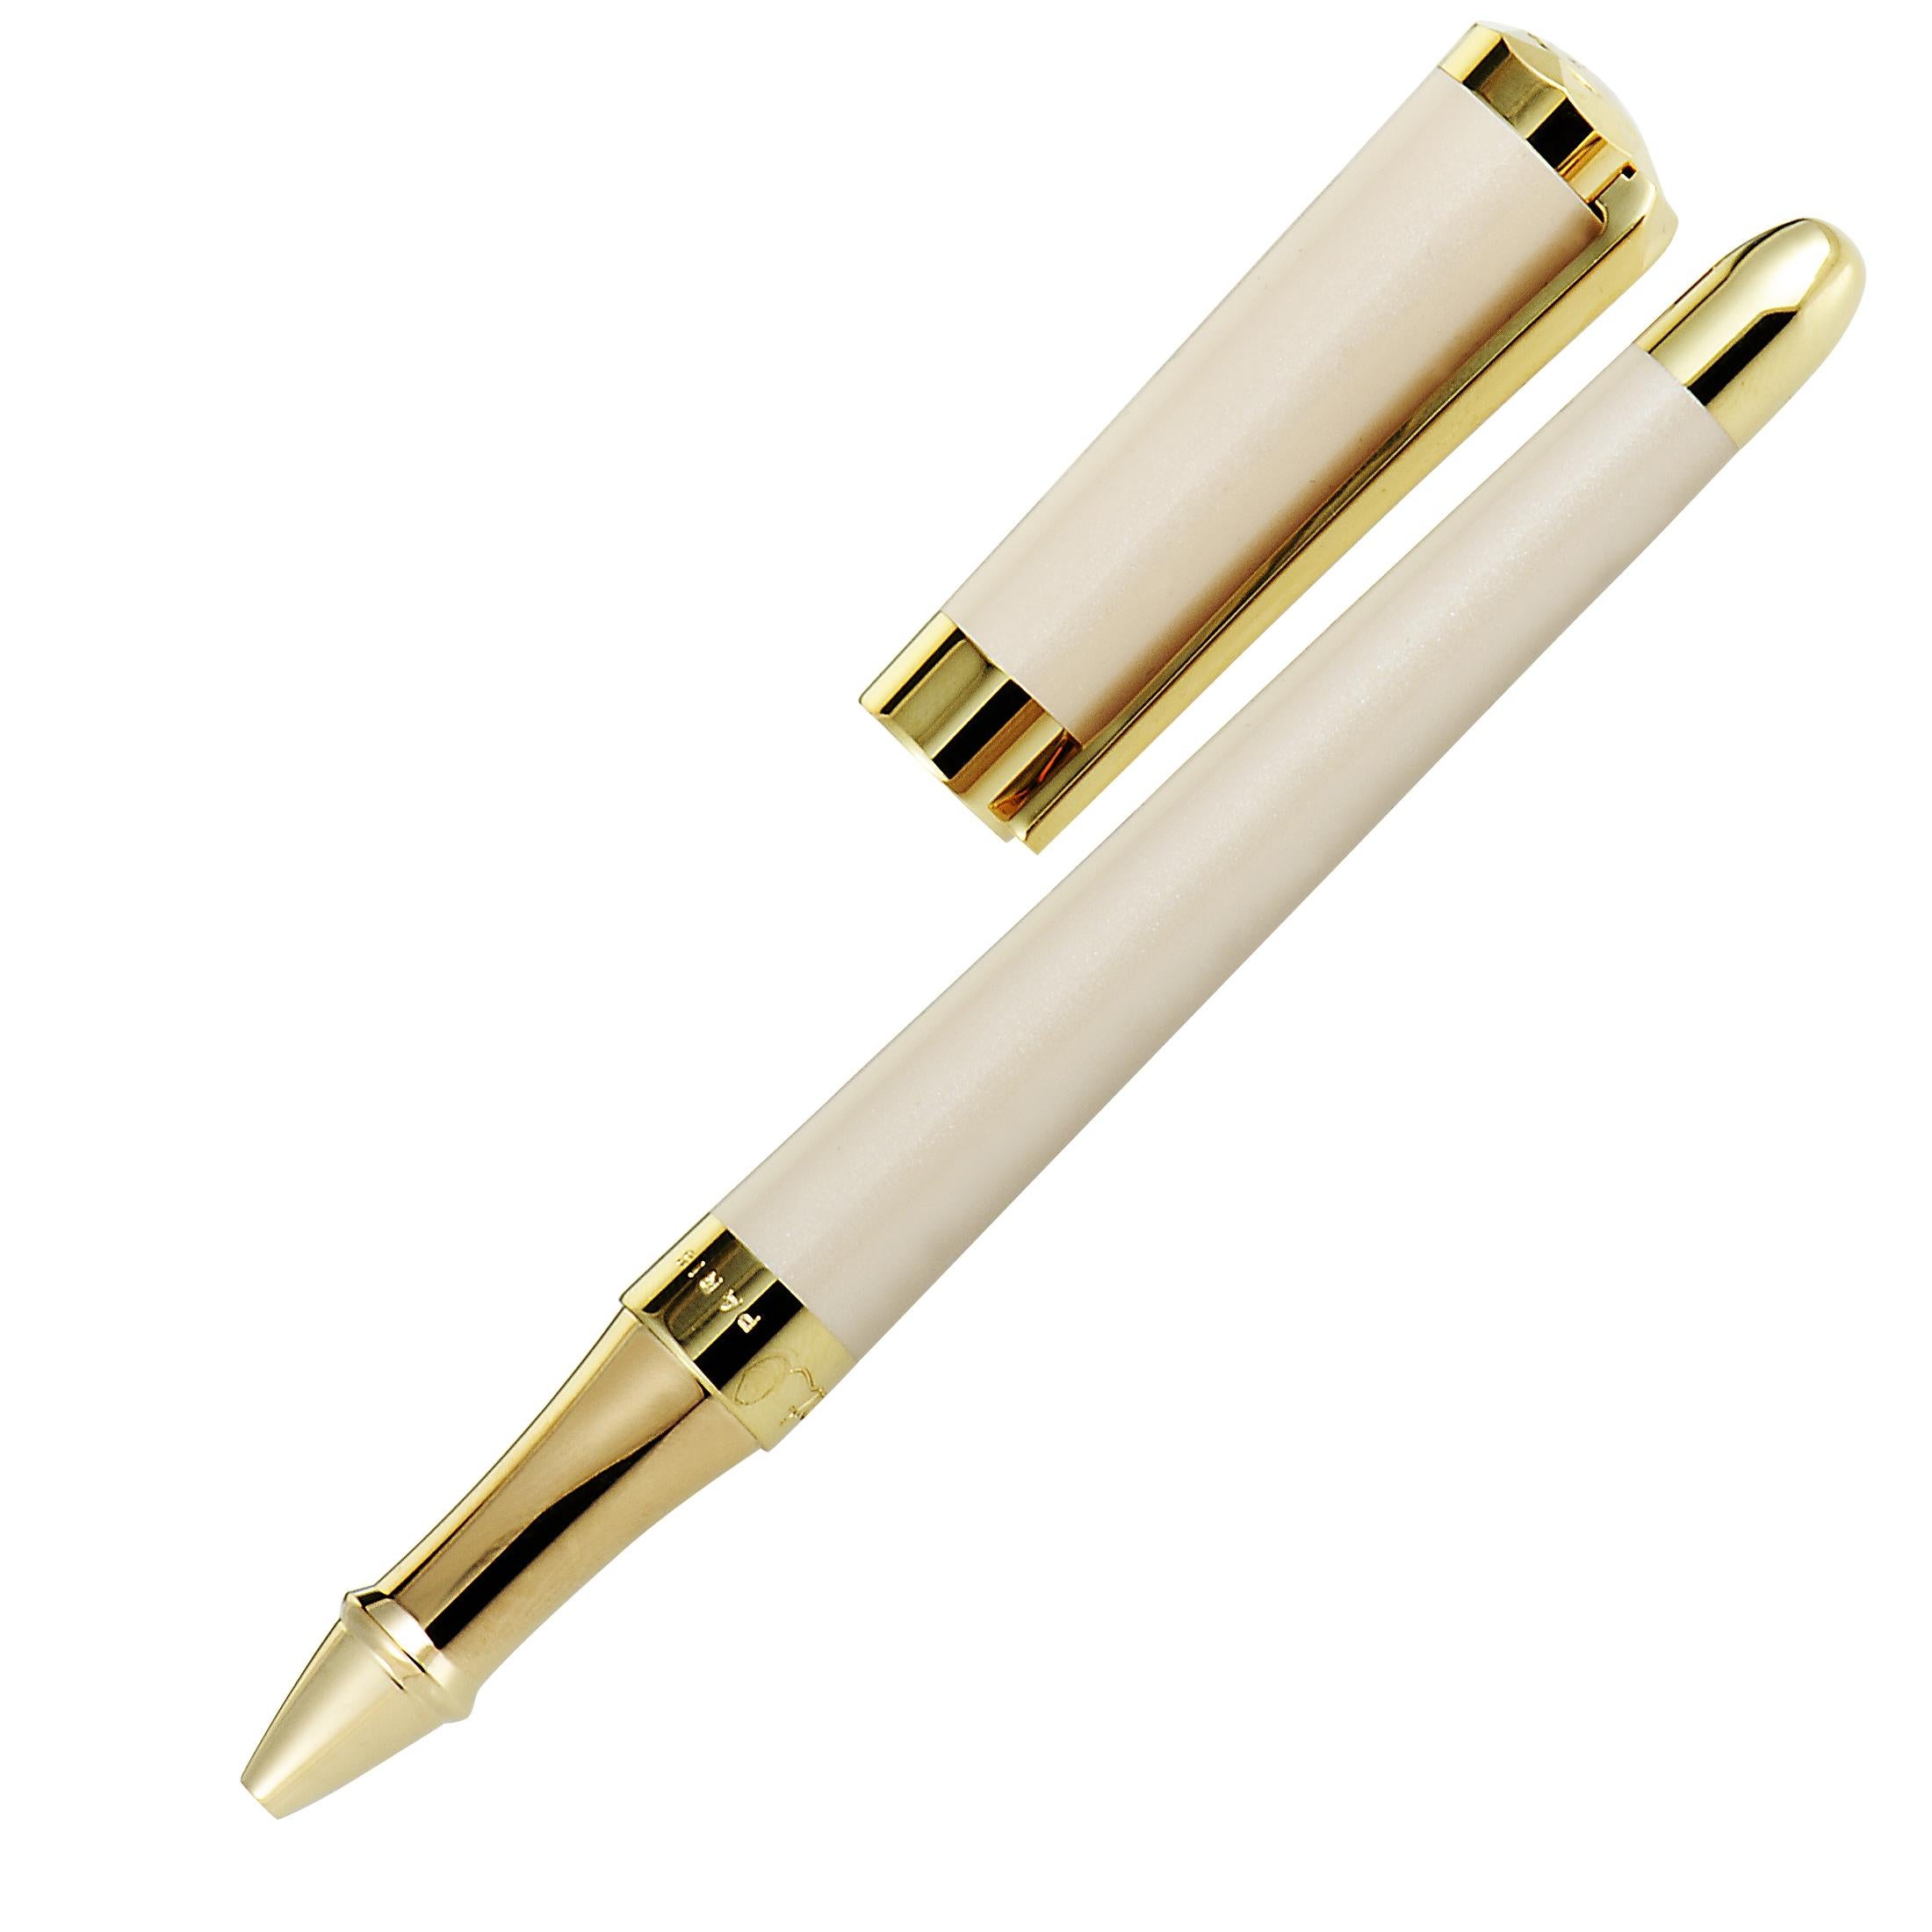 Beautifully designed in an exceptionally sleek, understated manner, and presented in sublime nude accentuated by alluring radiance, this exceptional rollerball pen is a vision of classic refinement. The pen is created by S.T. Dupont for the